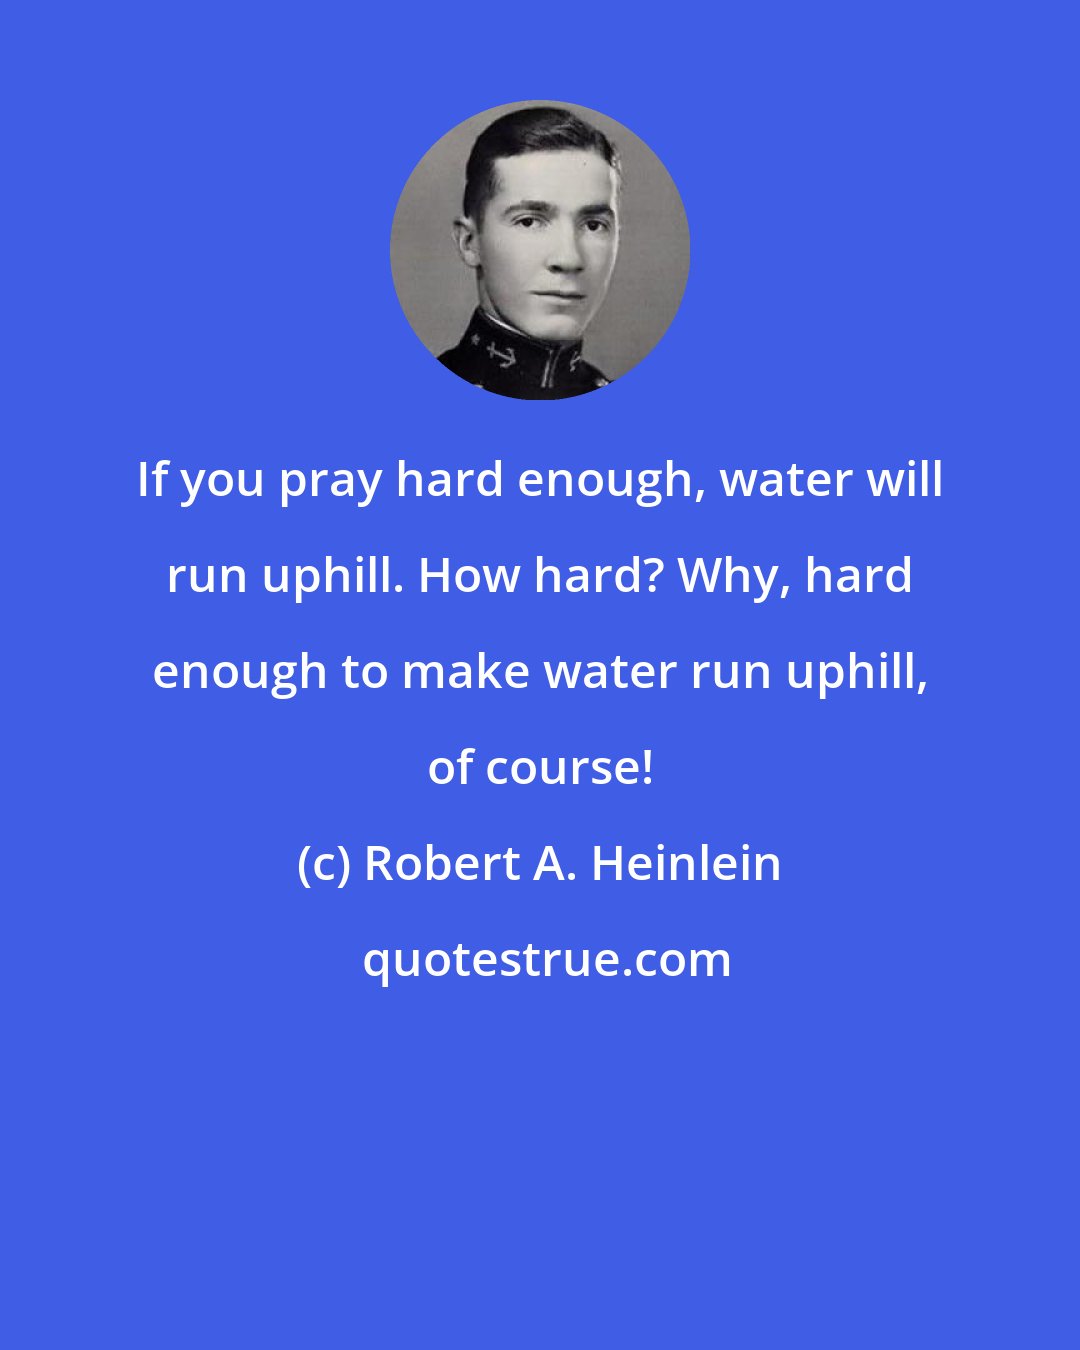 Robert A. Heinlein: If you pray hard enough, water will run uphill. How hard? Why, hard enough to make water run uphill, of course!